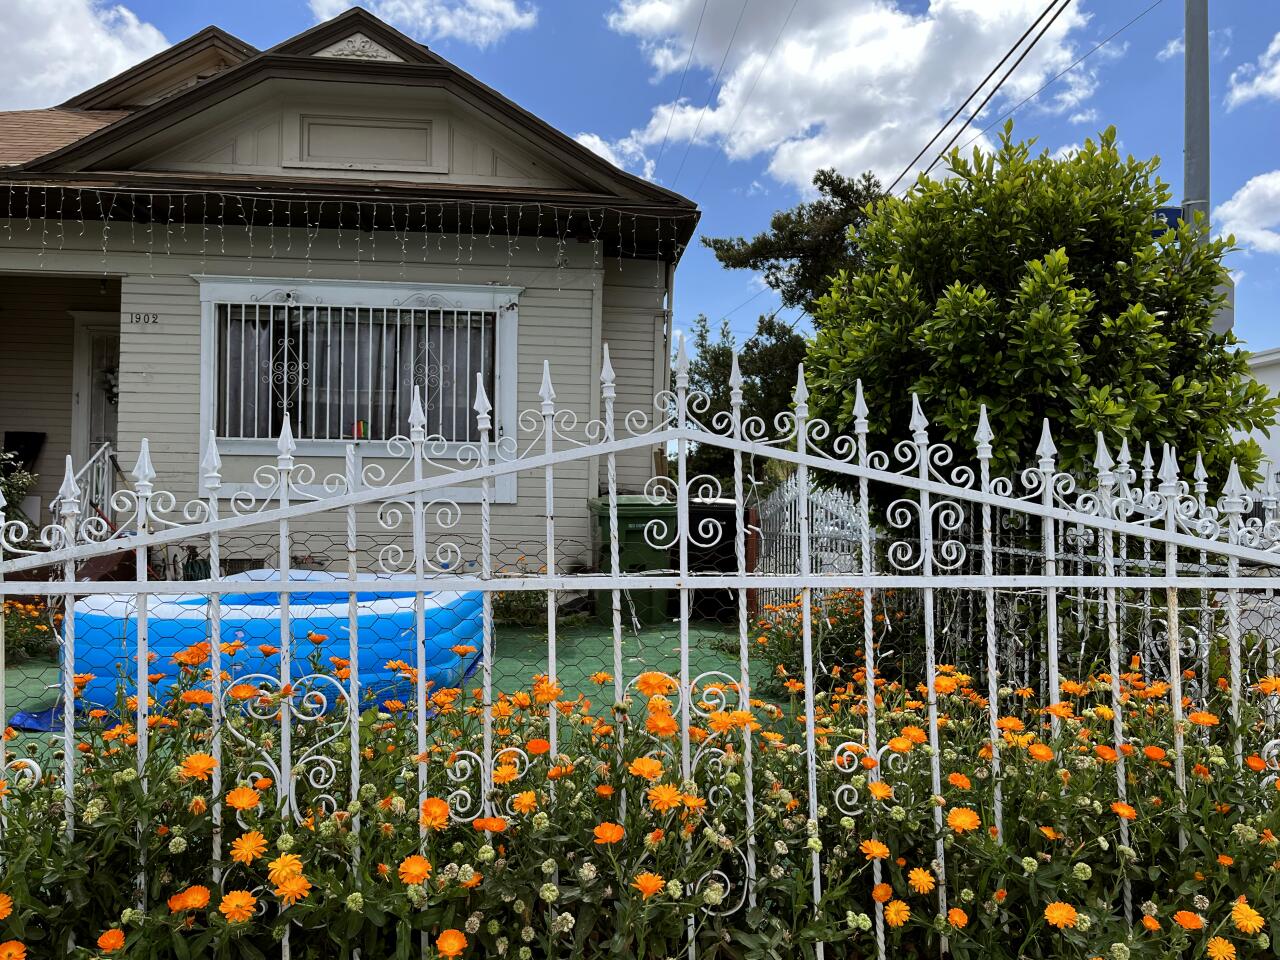 Marigolds along a white fence in Boyle Heights